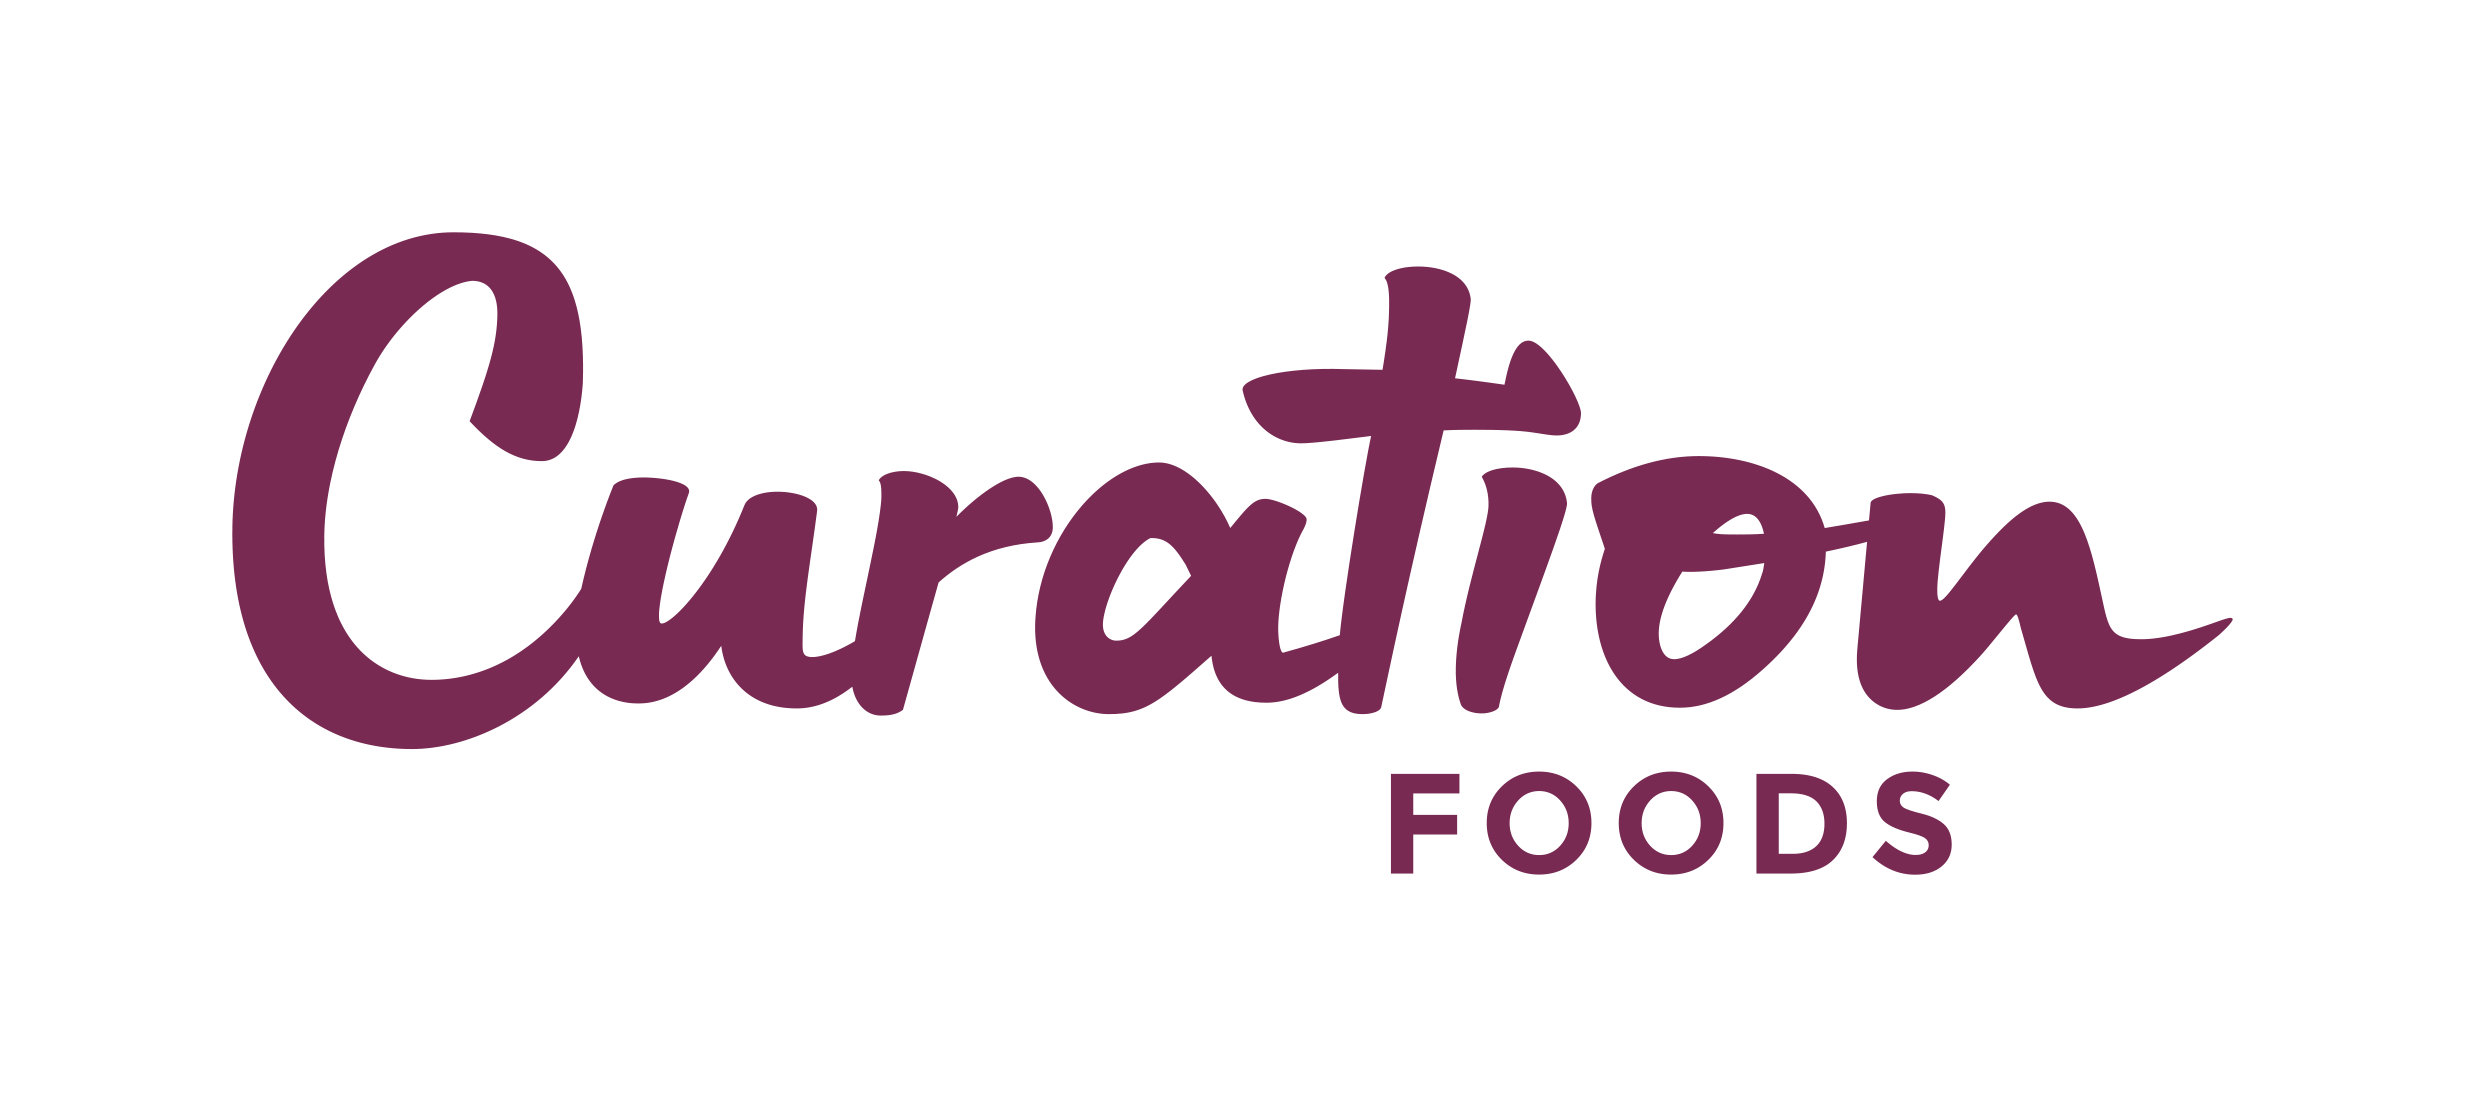 Curation Foods logo.png